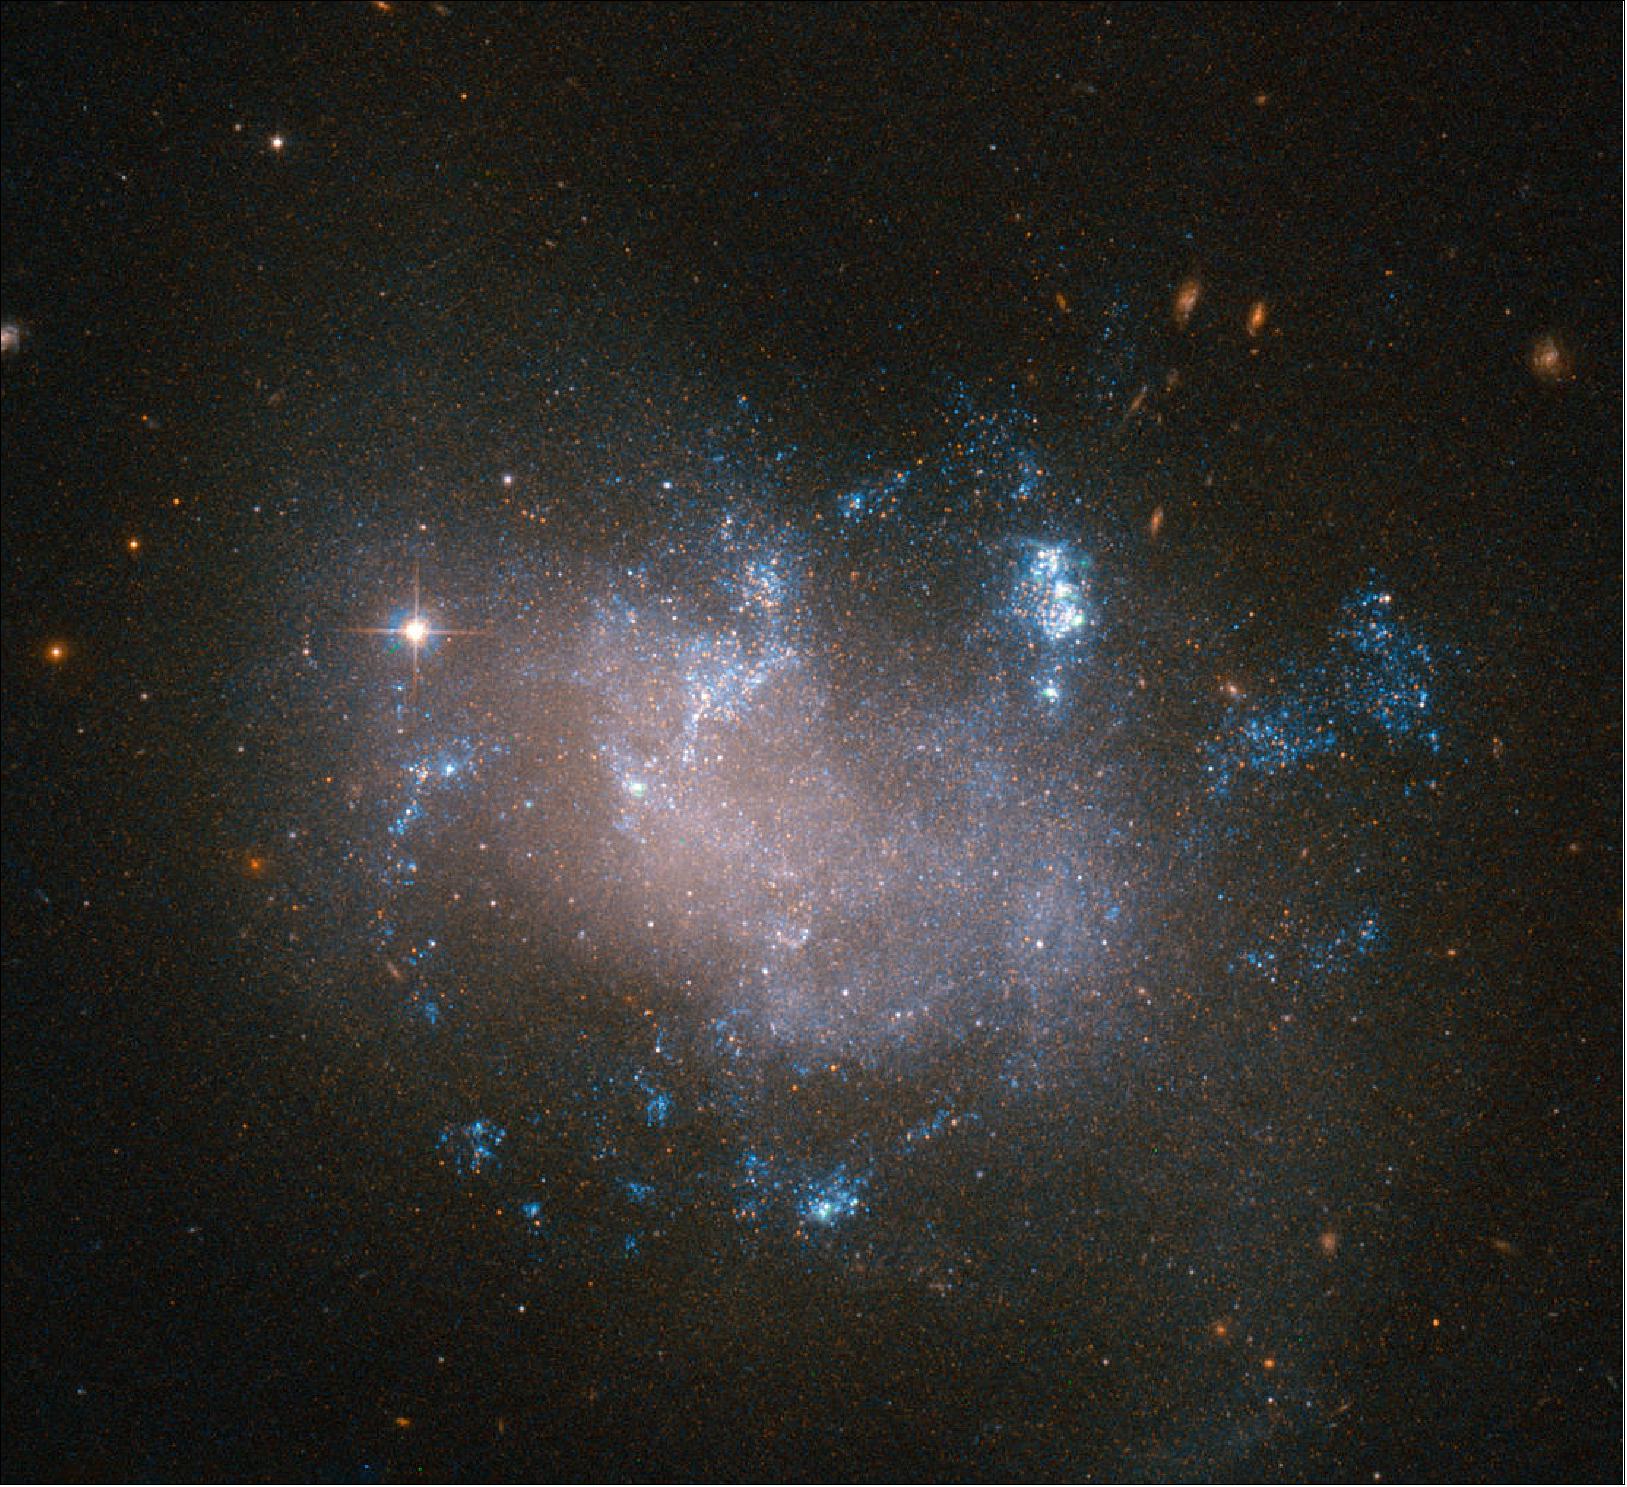 Figure 30: Glowing warmly against the dark backdrop of the Universe, this image from the NASA/ESA Hubble Space Telescope shows an irregular galaxy called UGC 12682. Located approximately 70 million light-years away in the constellation of Pegasus (The Winged Horse), UGC 12682 is distorted and oddly-structured, with bright pockets of star formation (image credit: ESA/Hubble & NASA, CC BY 4.0)